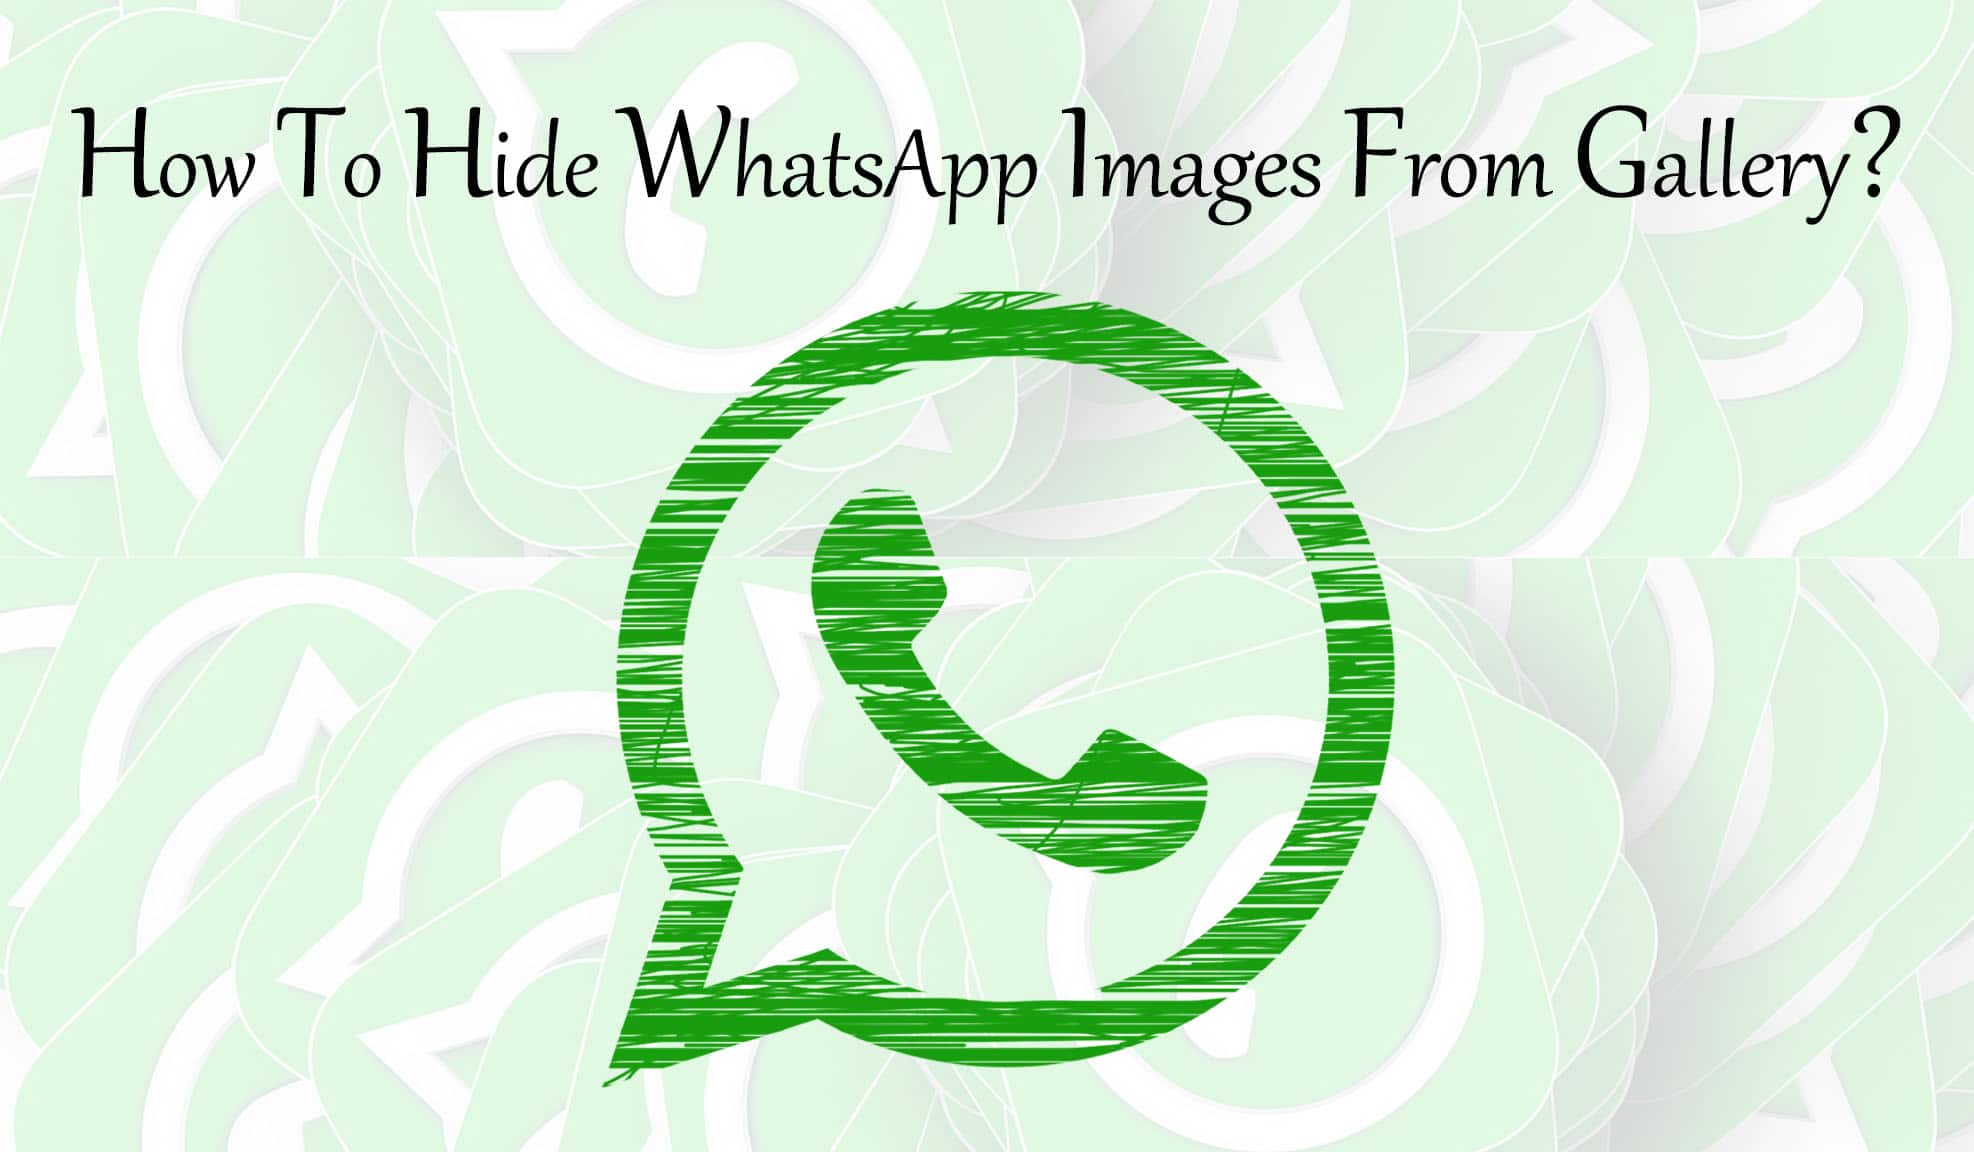 Hide WhatsApp Images From Gallery